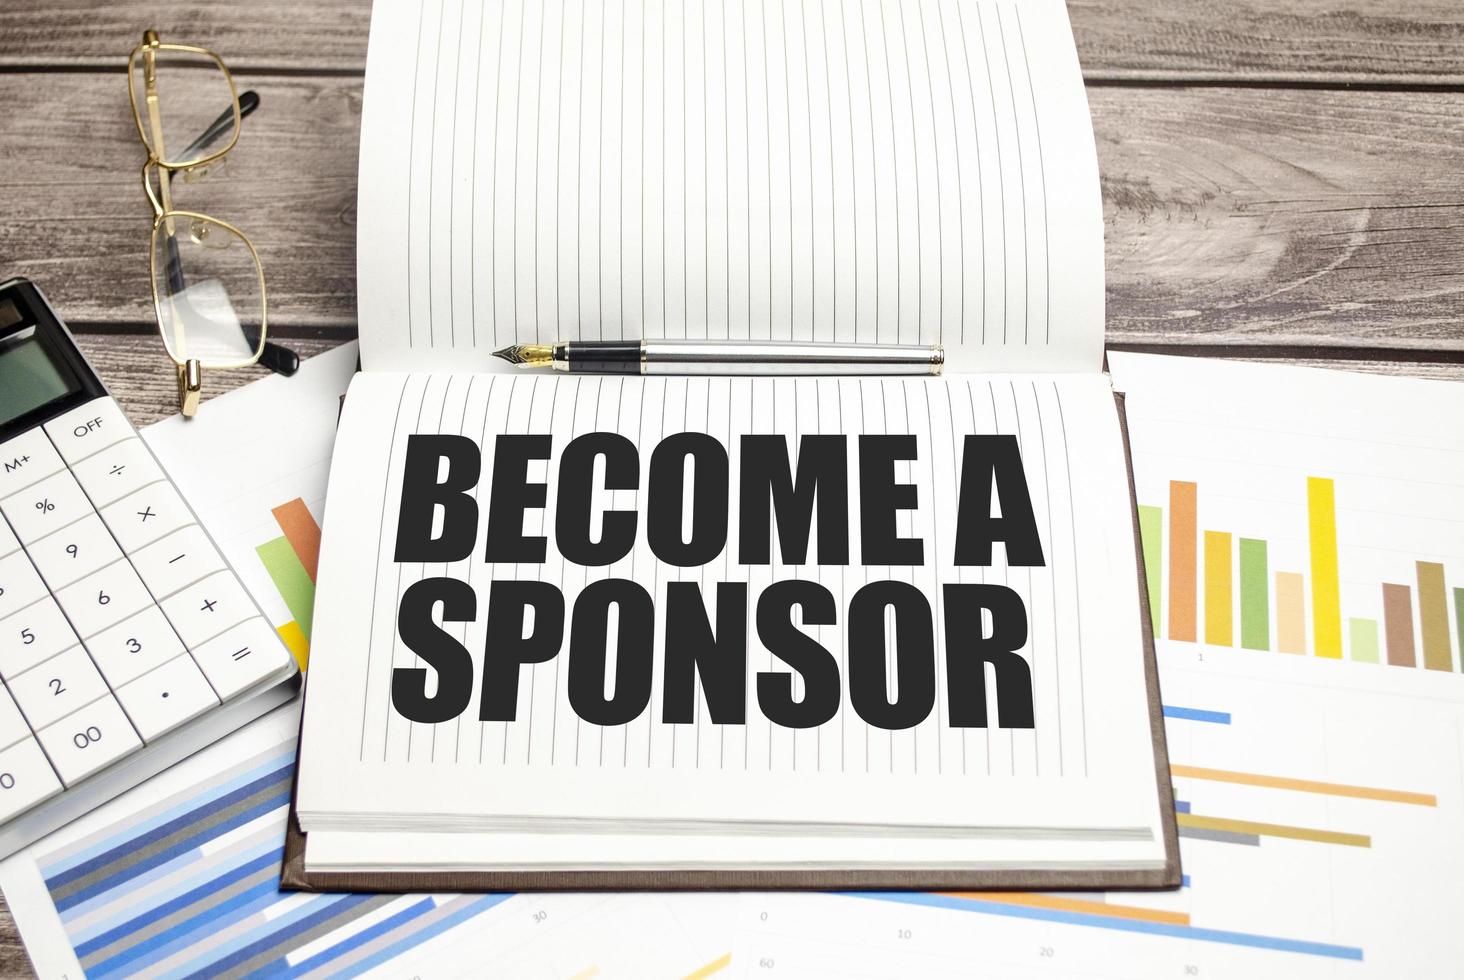 BECOME A SPONSOR on notepad and charts with calculator photo